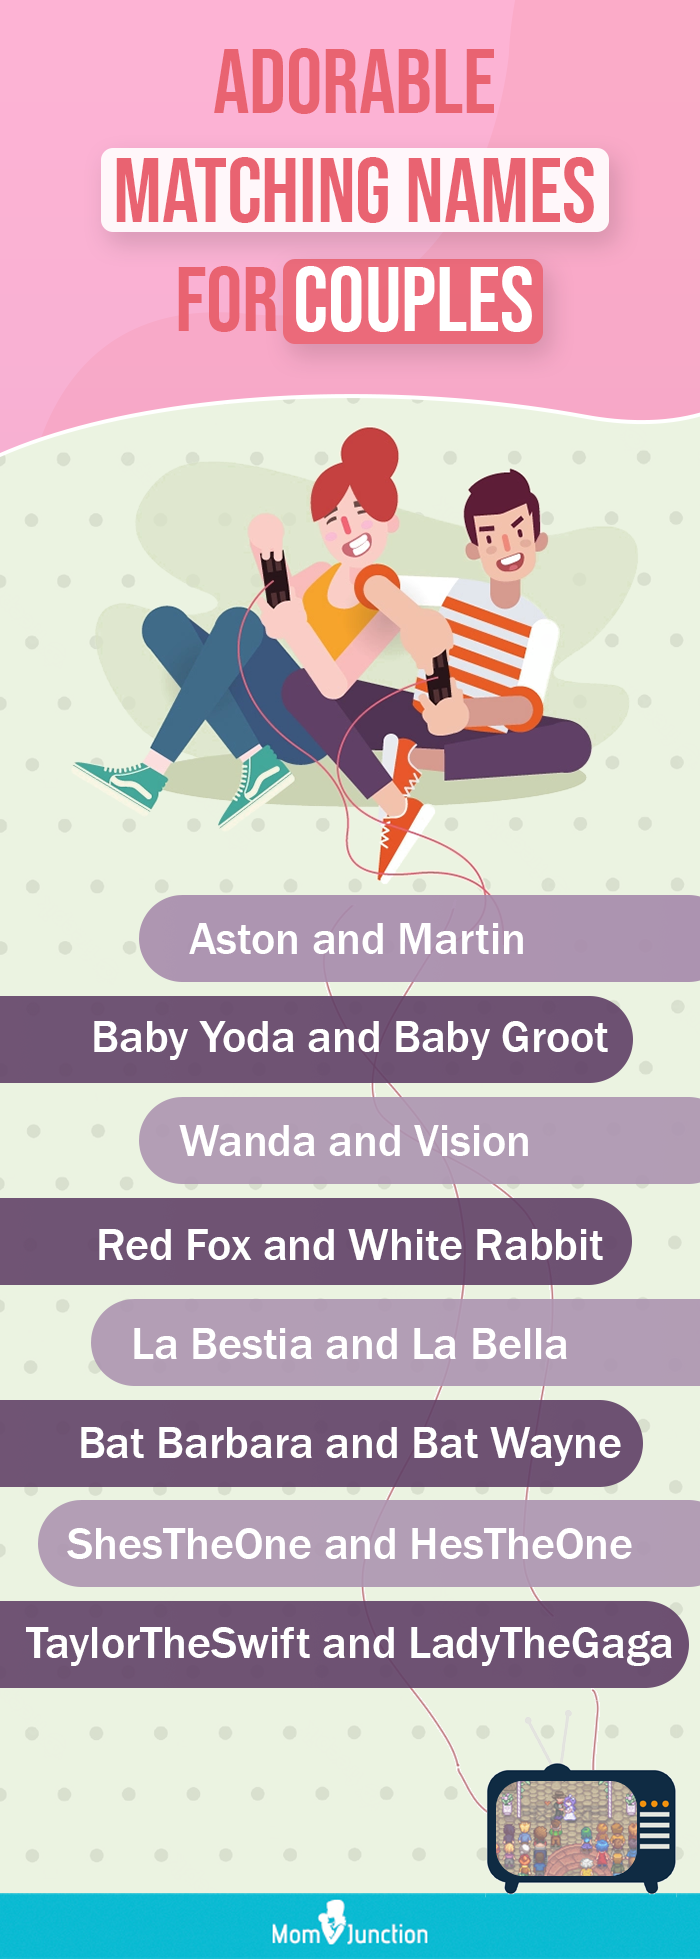 adorable matching names for couples (infographic)